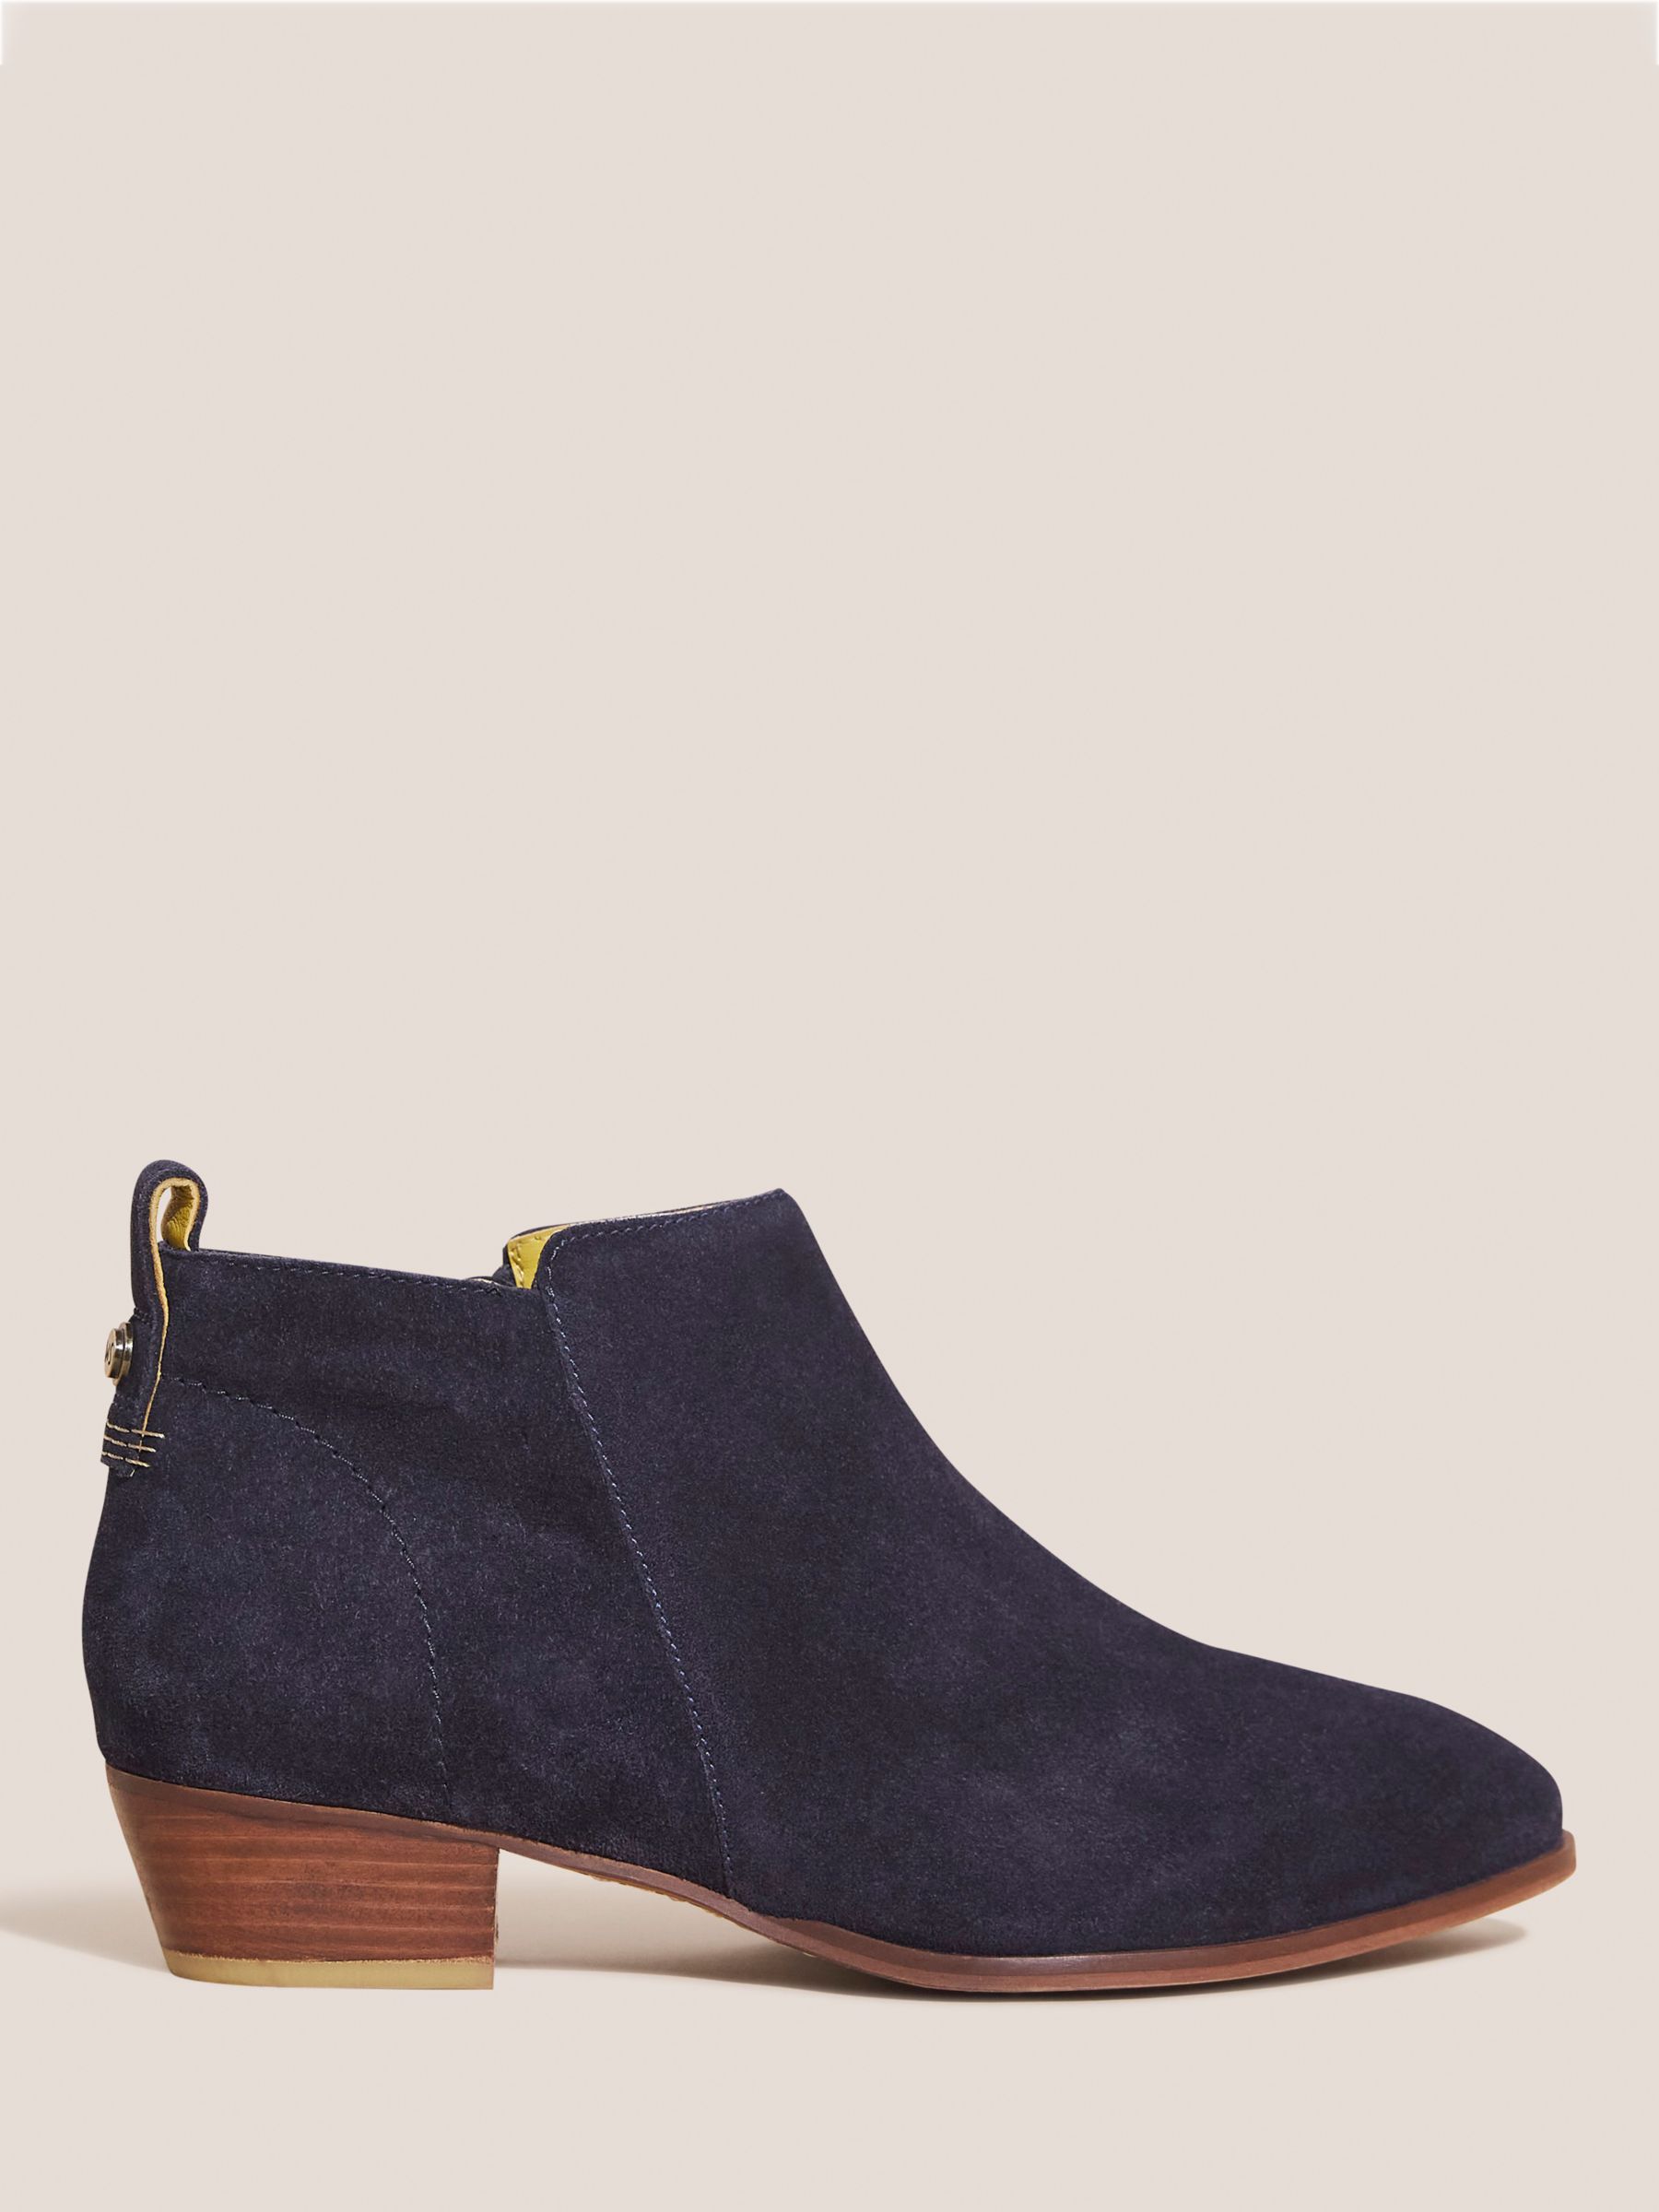 White Stuff Suede Ankle Boots, Dark Navy at John Lewis & Partners